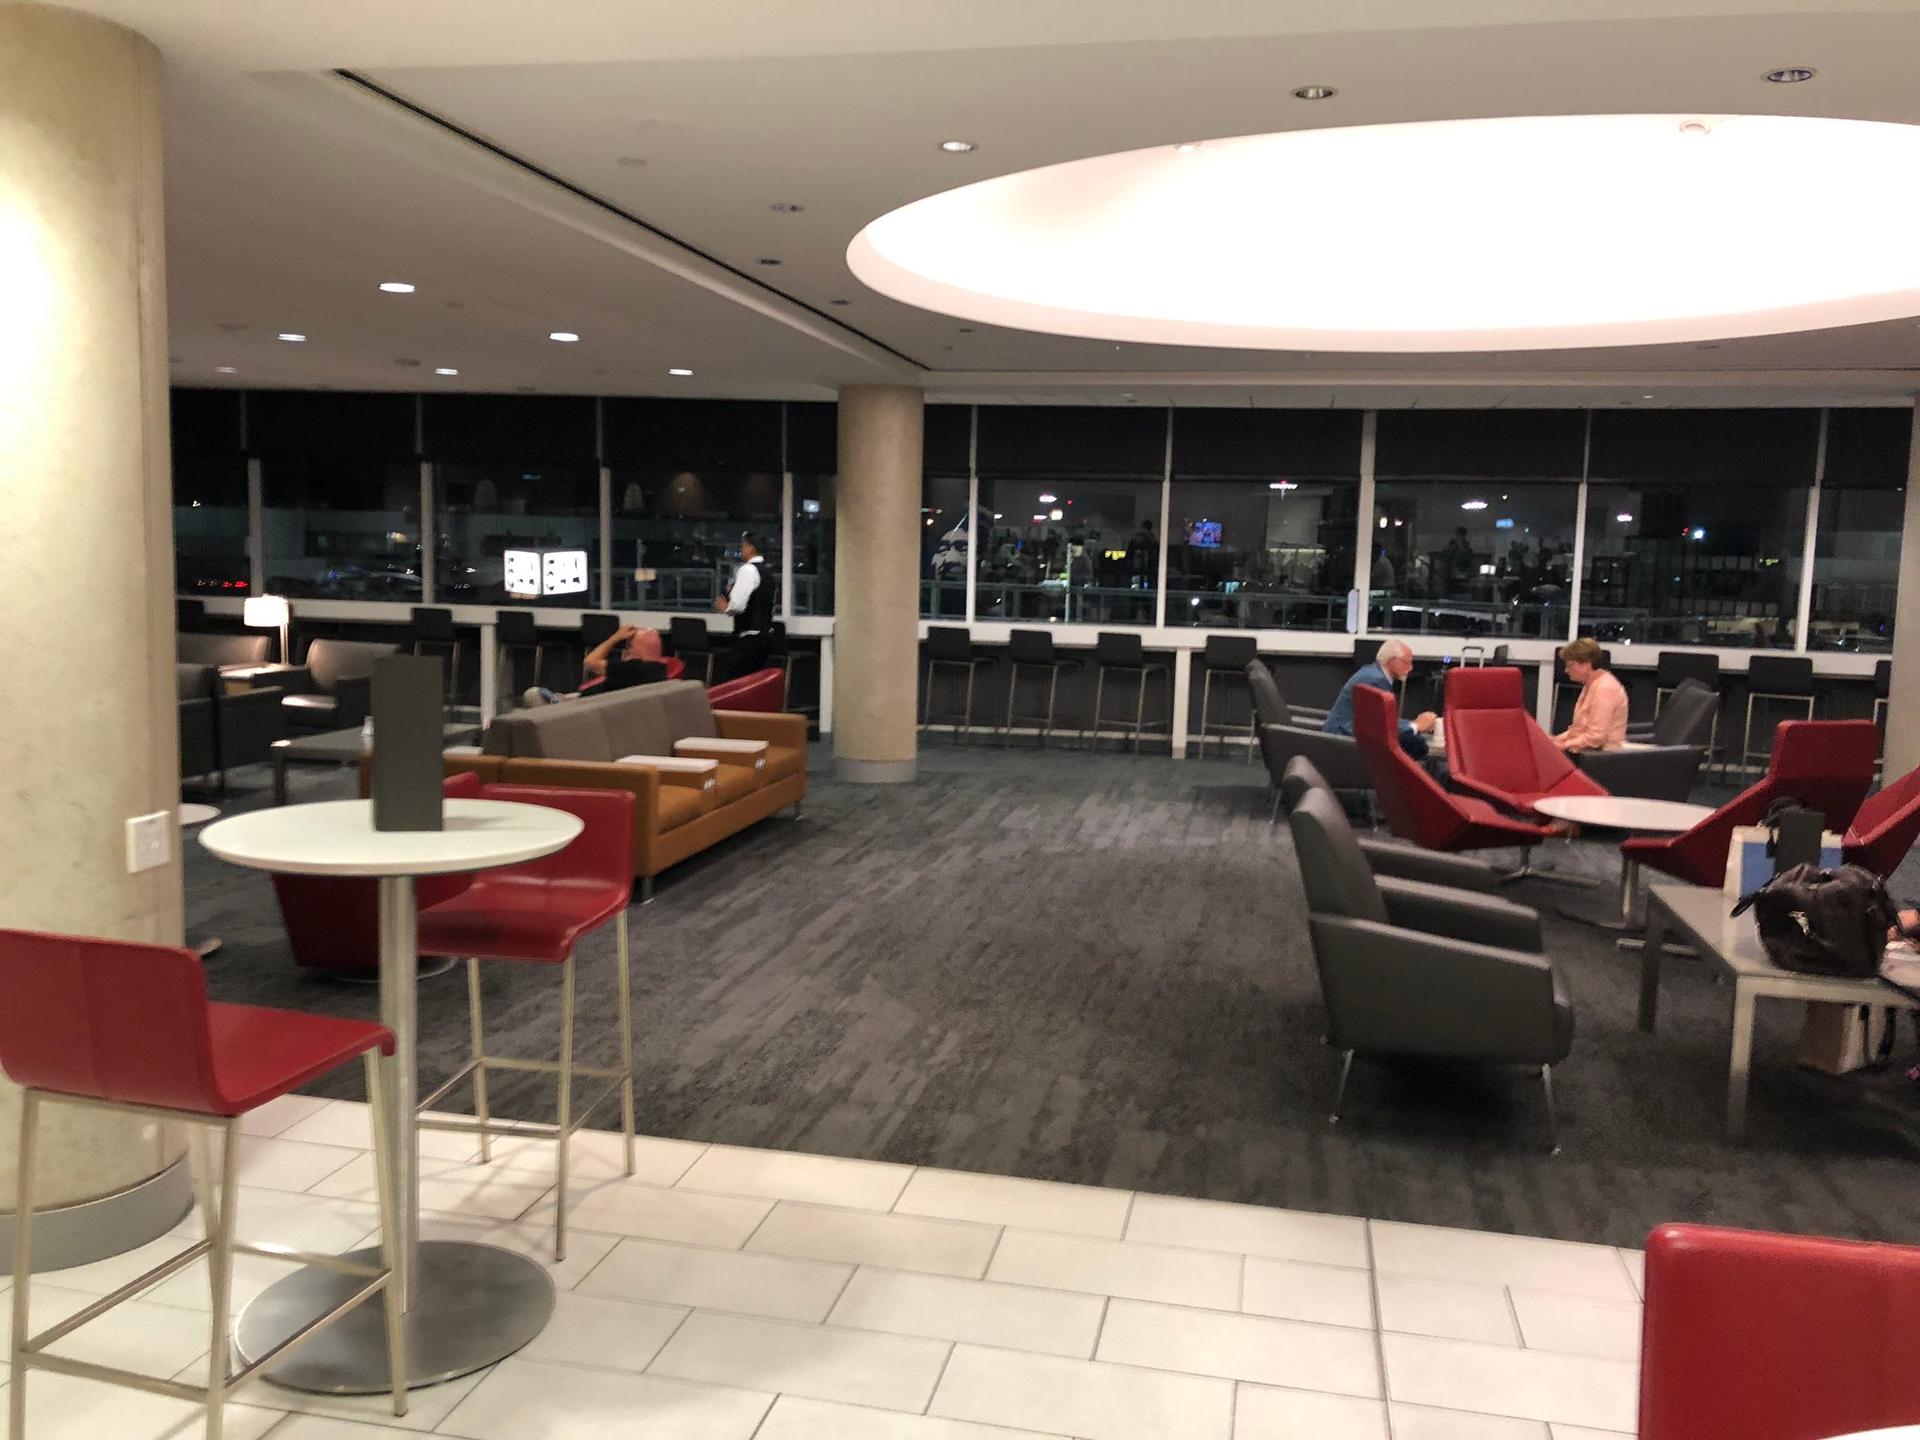 American Airlines Admirals Club image 34 of 38